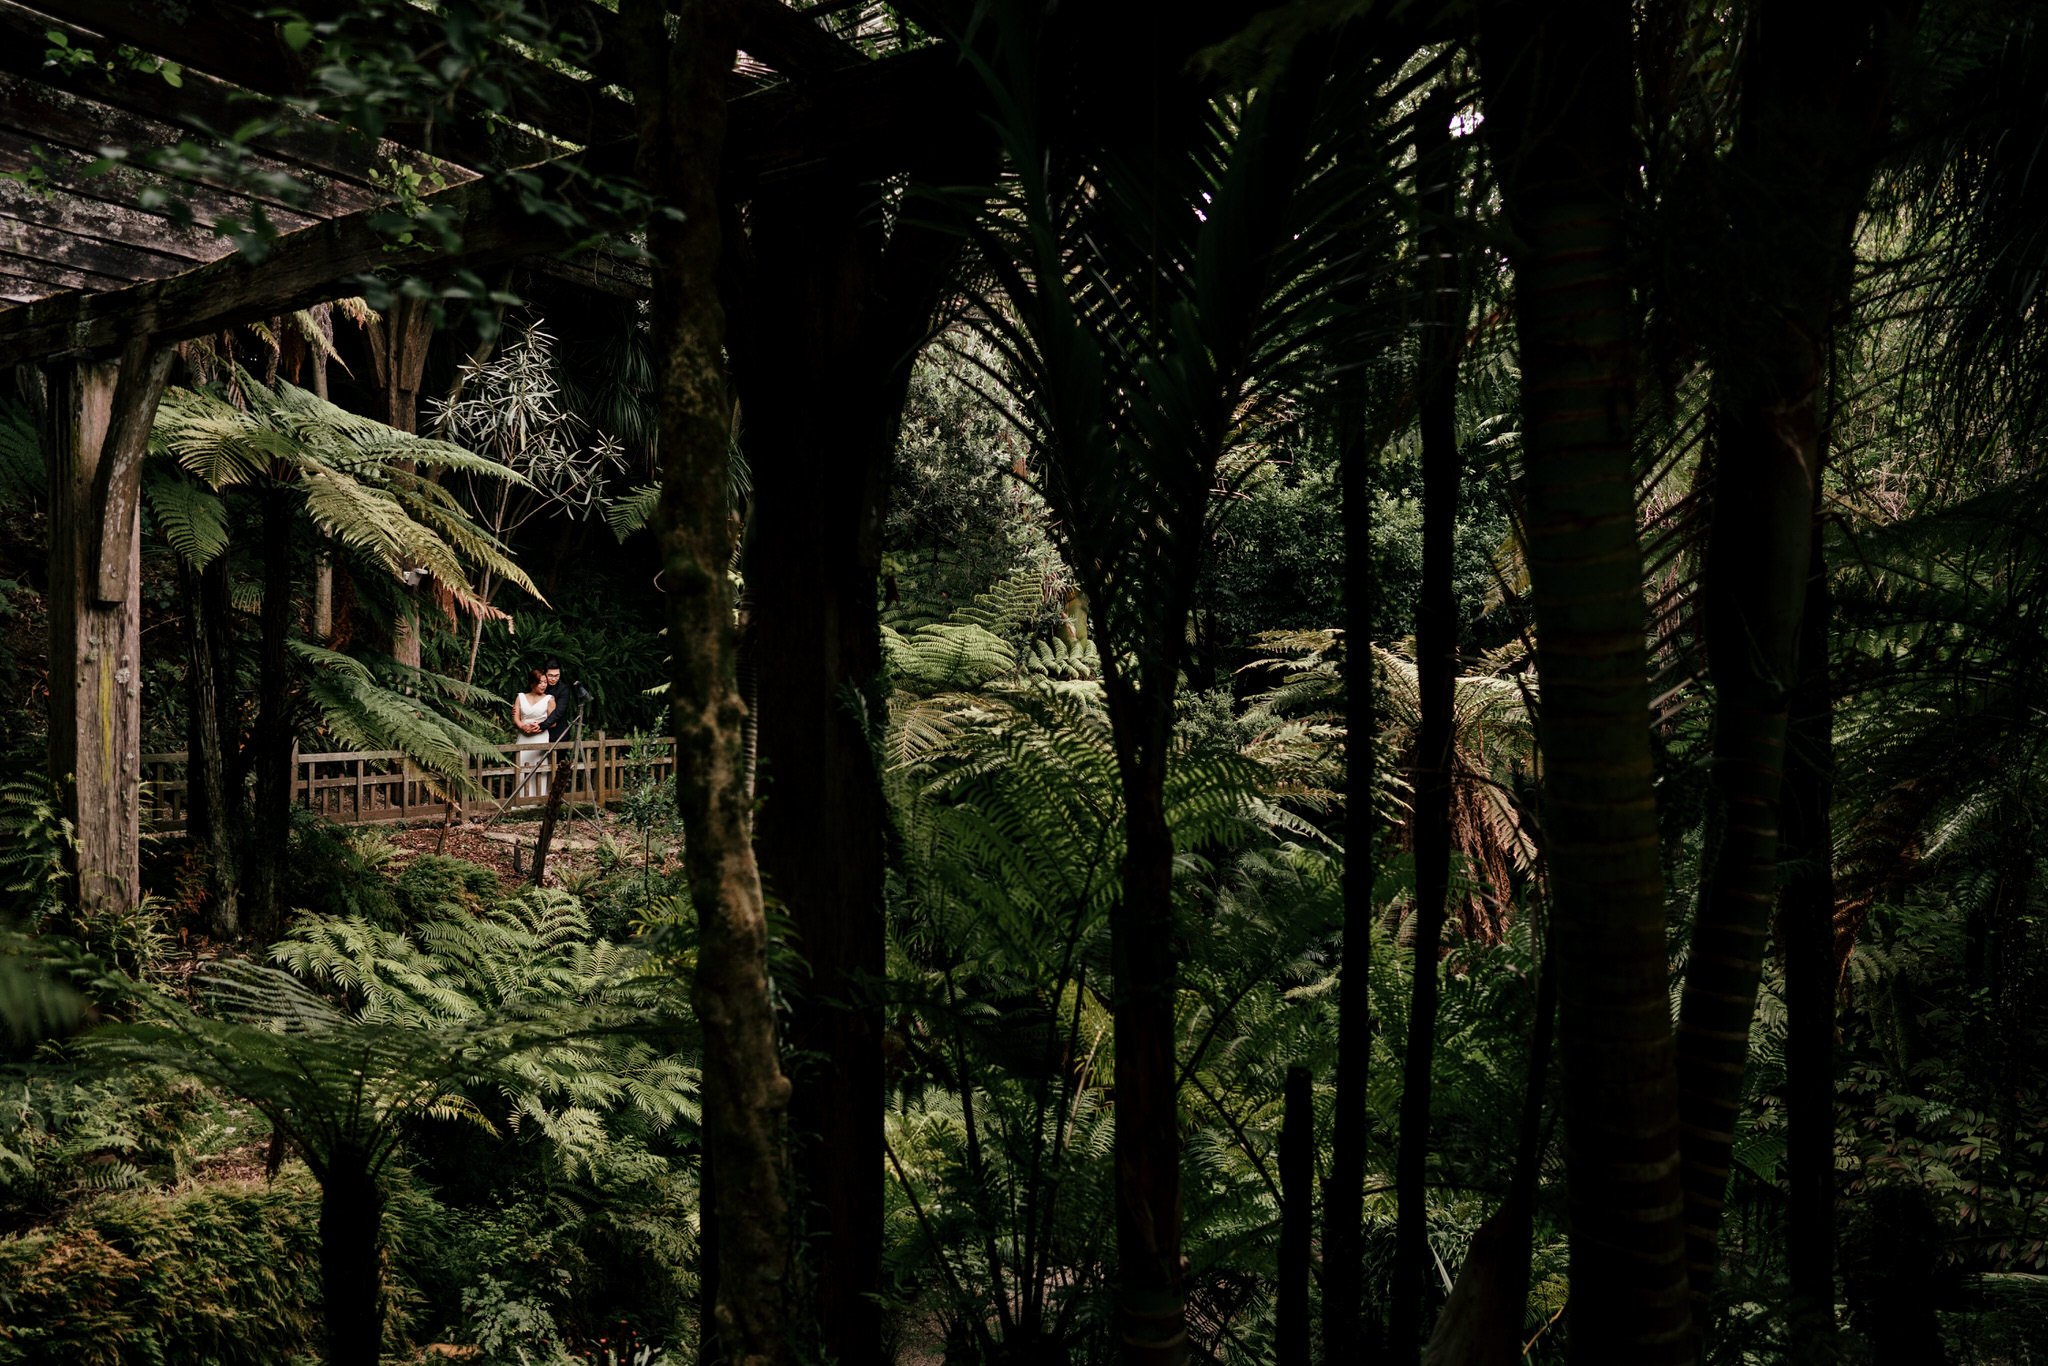 auckland-wedding-photographer-videographer-story-by-koo-koo's-jewelry-dear-white-productions-pre-wedding-engagement-photo-glass-house-botanic-fernery-garden (34).JPG